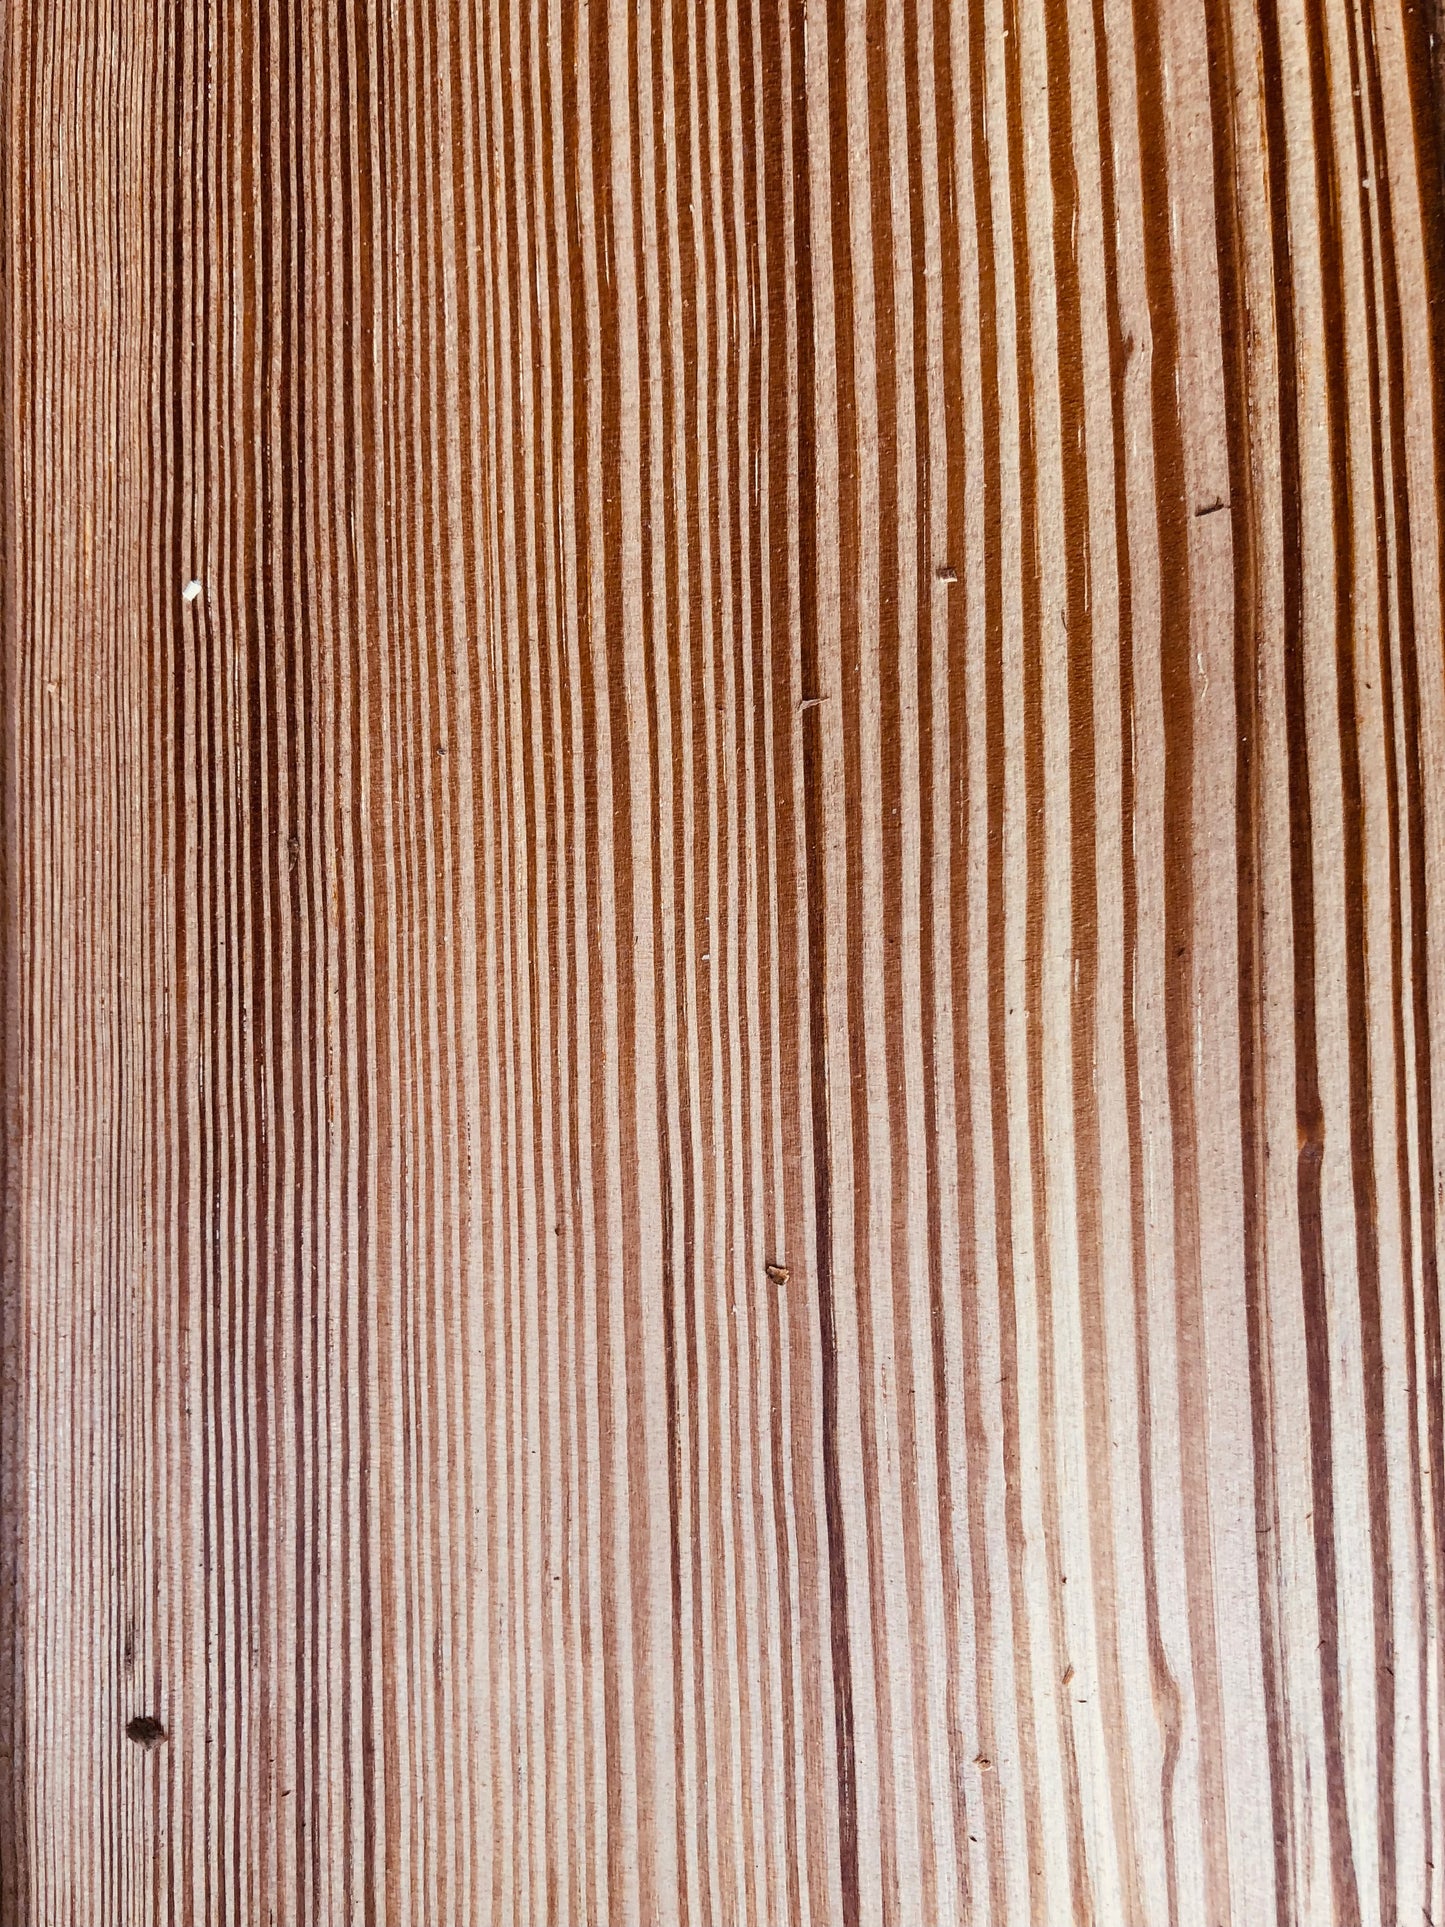 Pitch pine’s tight and solid wood grain